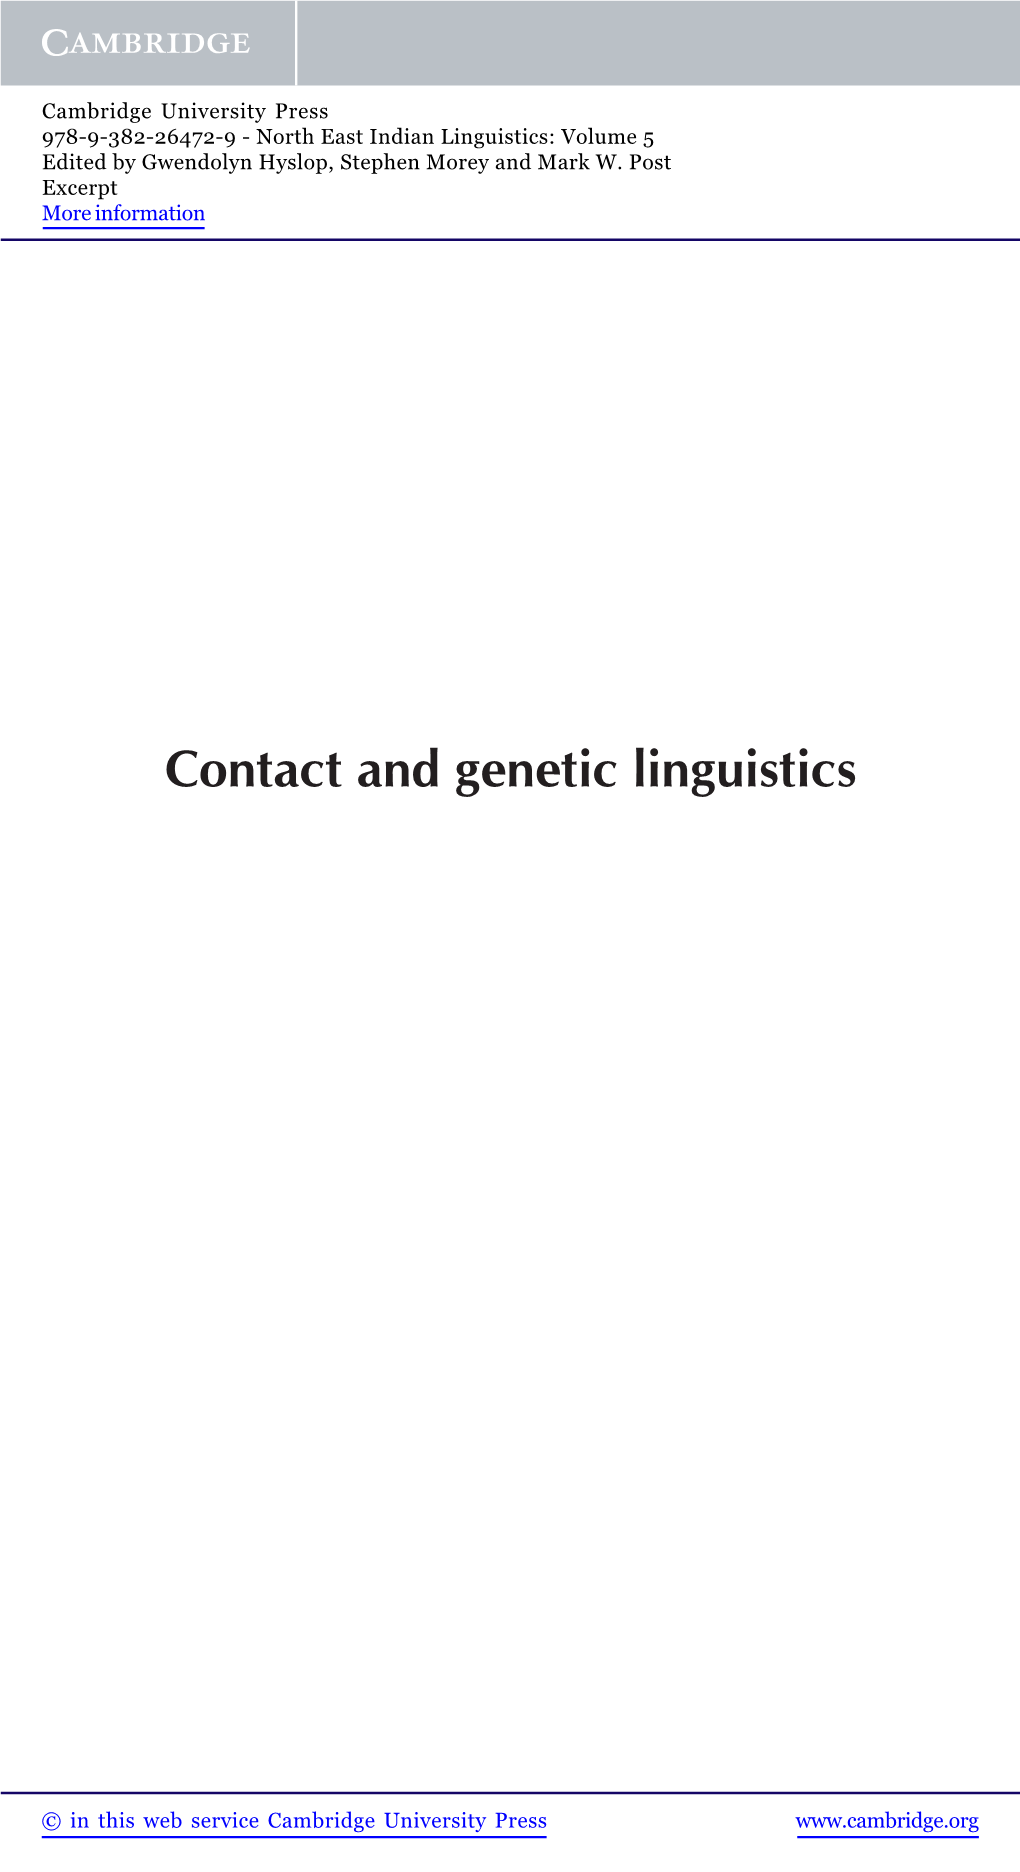 Contact and Genetic Linguistics